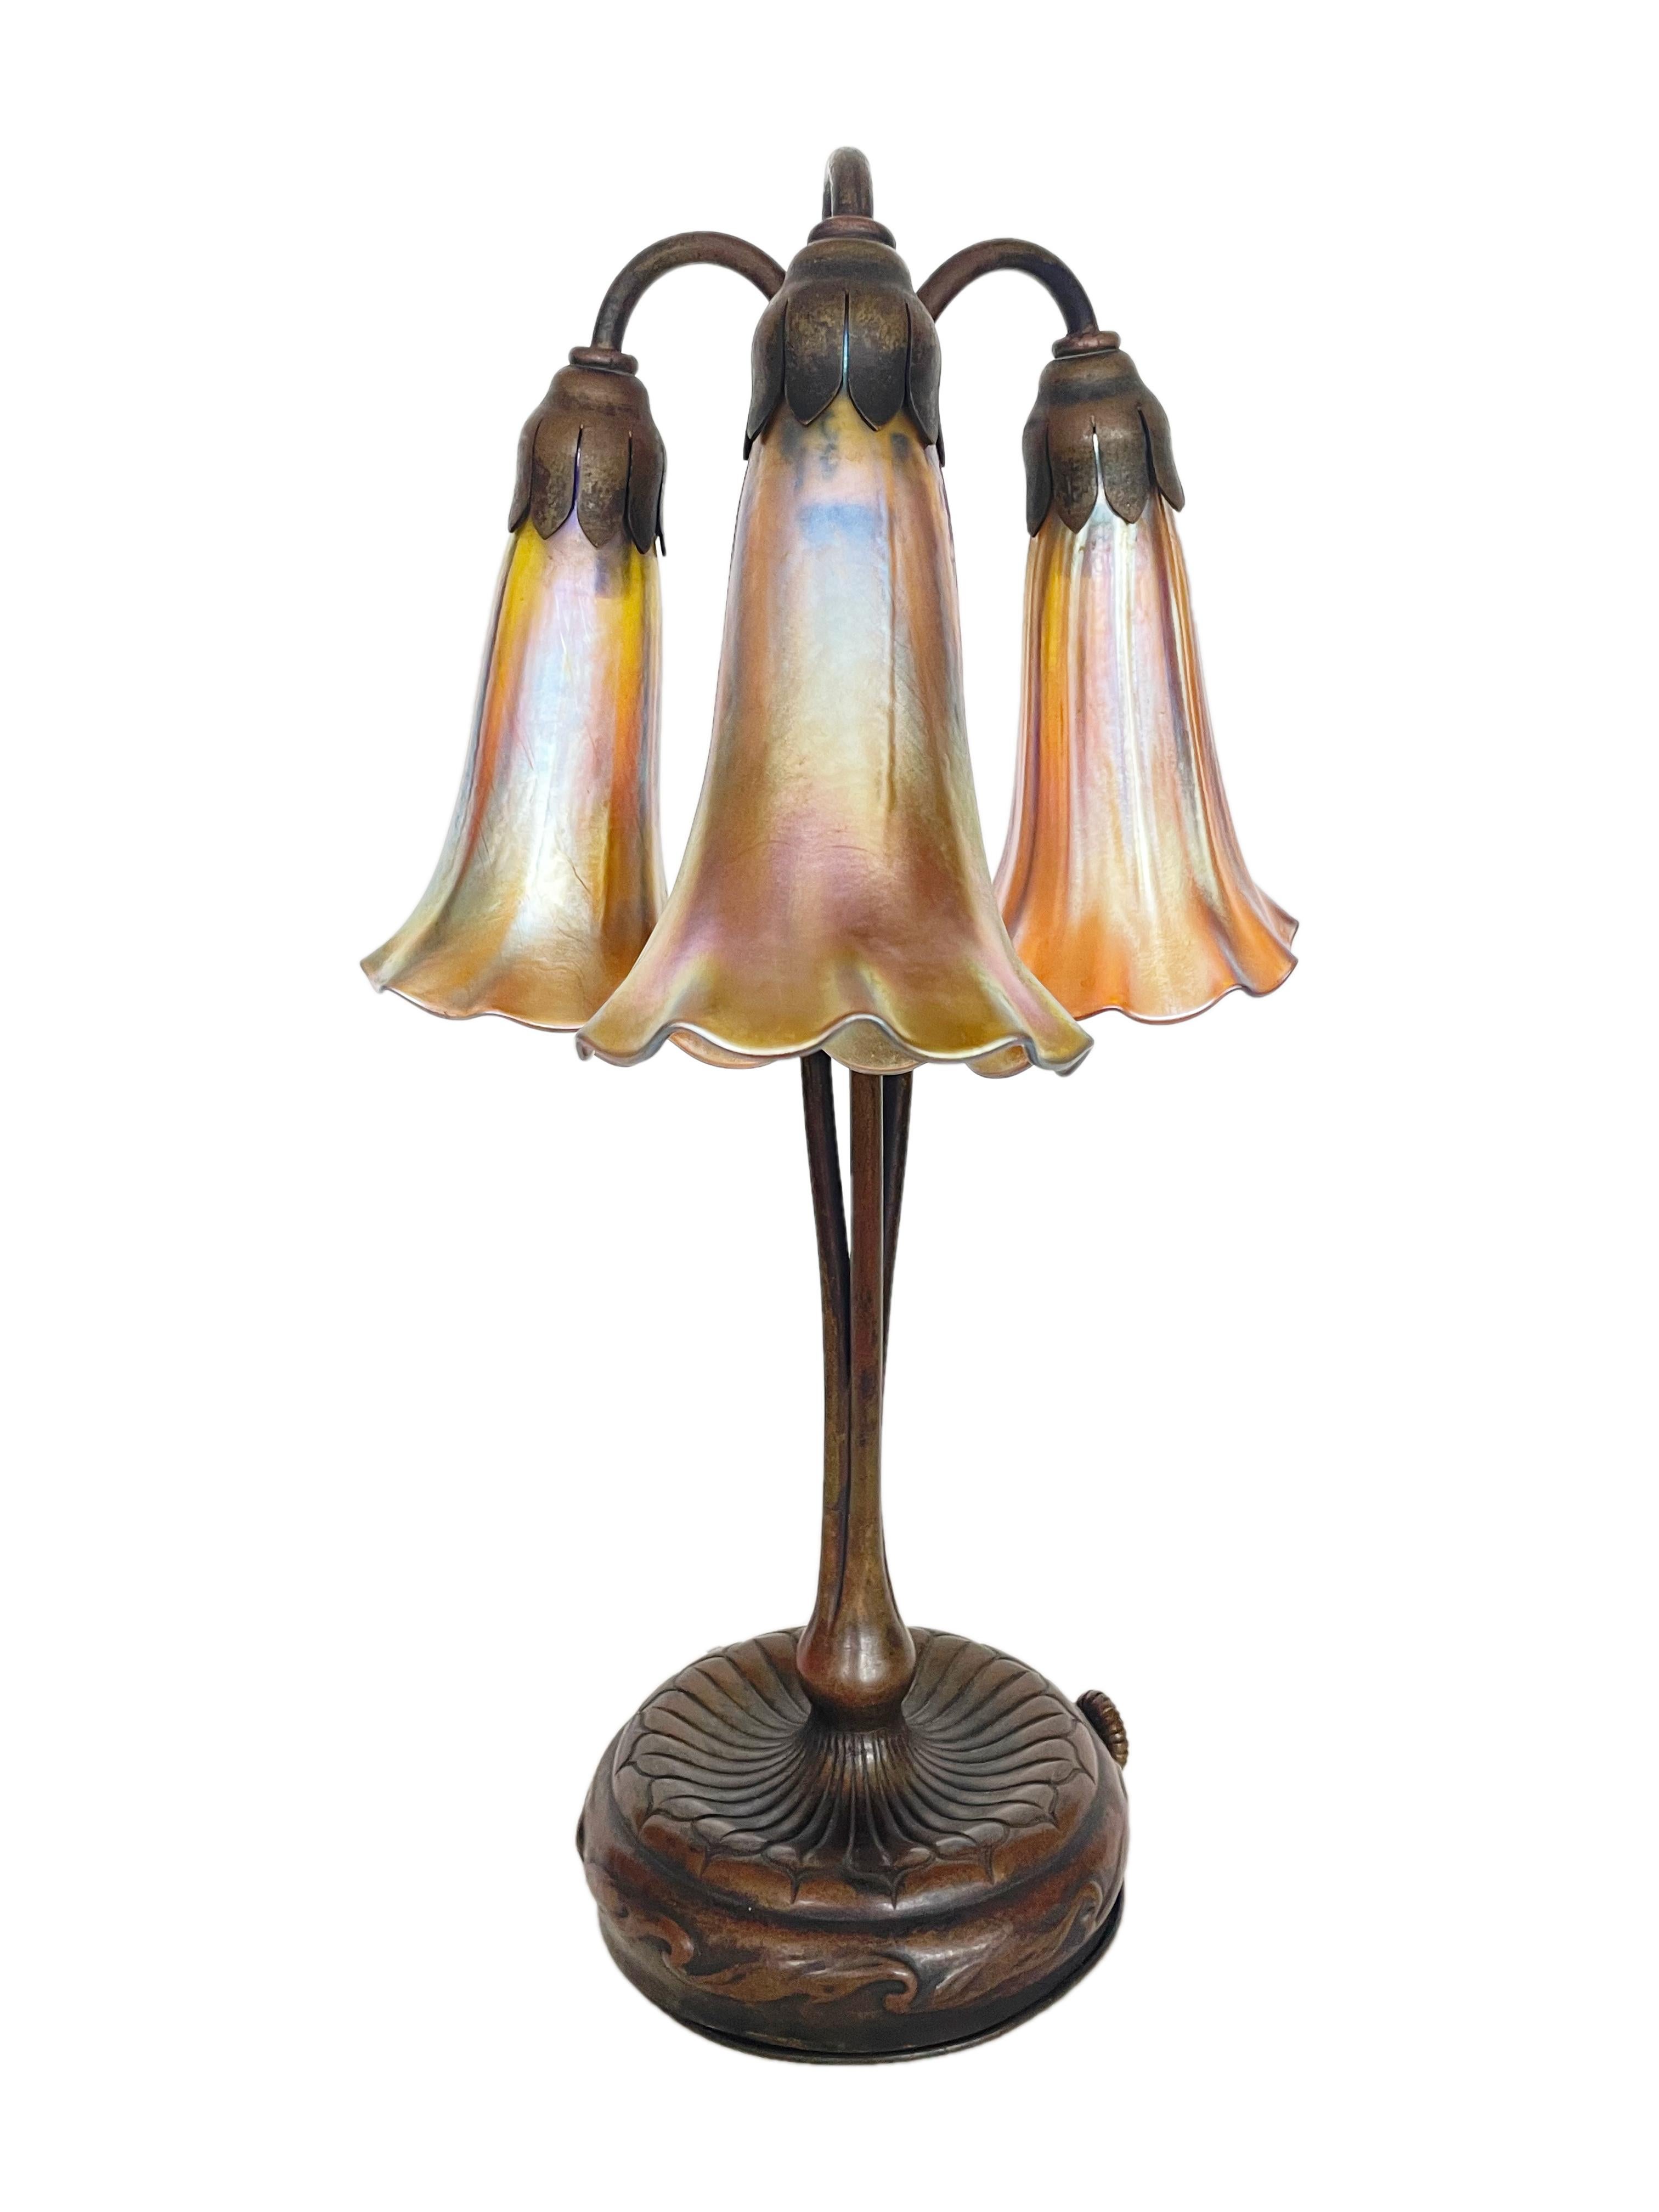 Early 20th Century Art Nouveau Shower Lily Desk Lamp by, Tiffany Studios 1